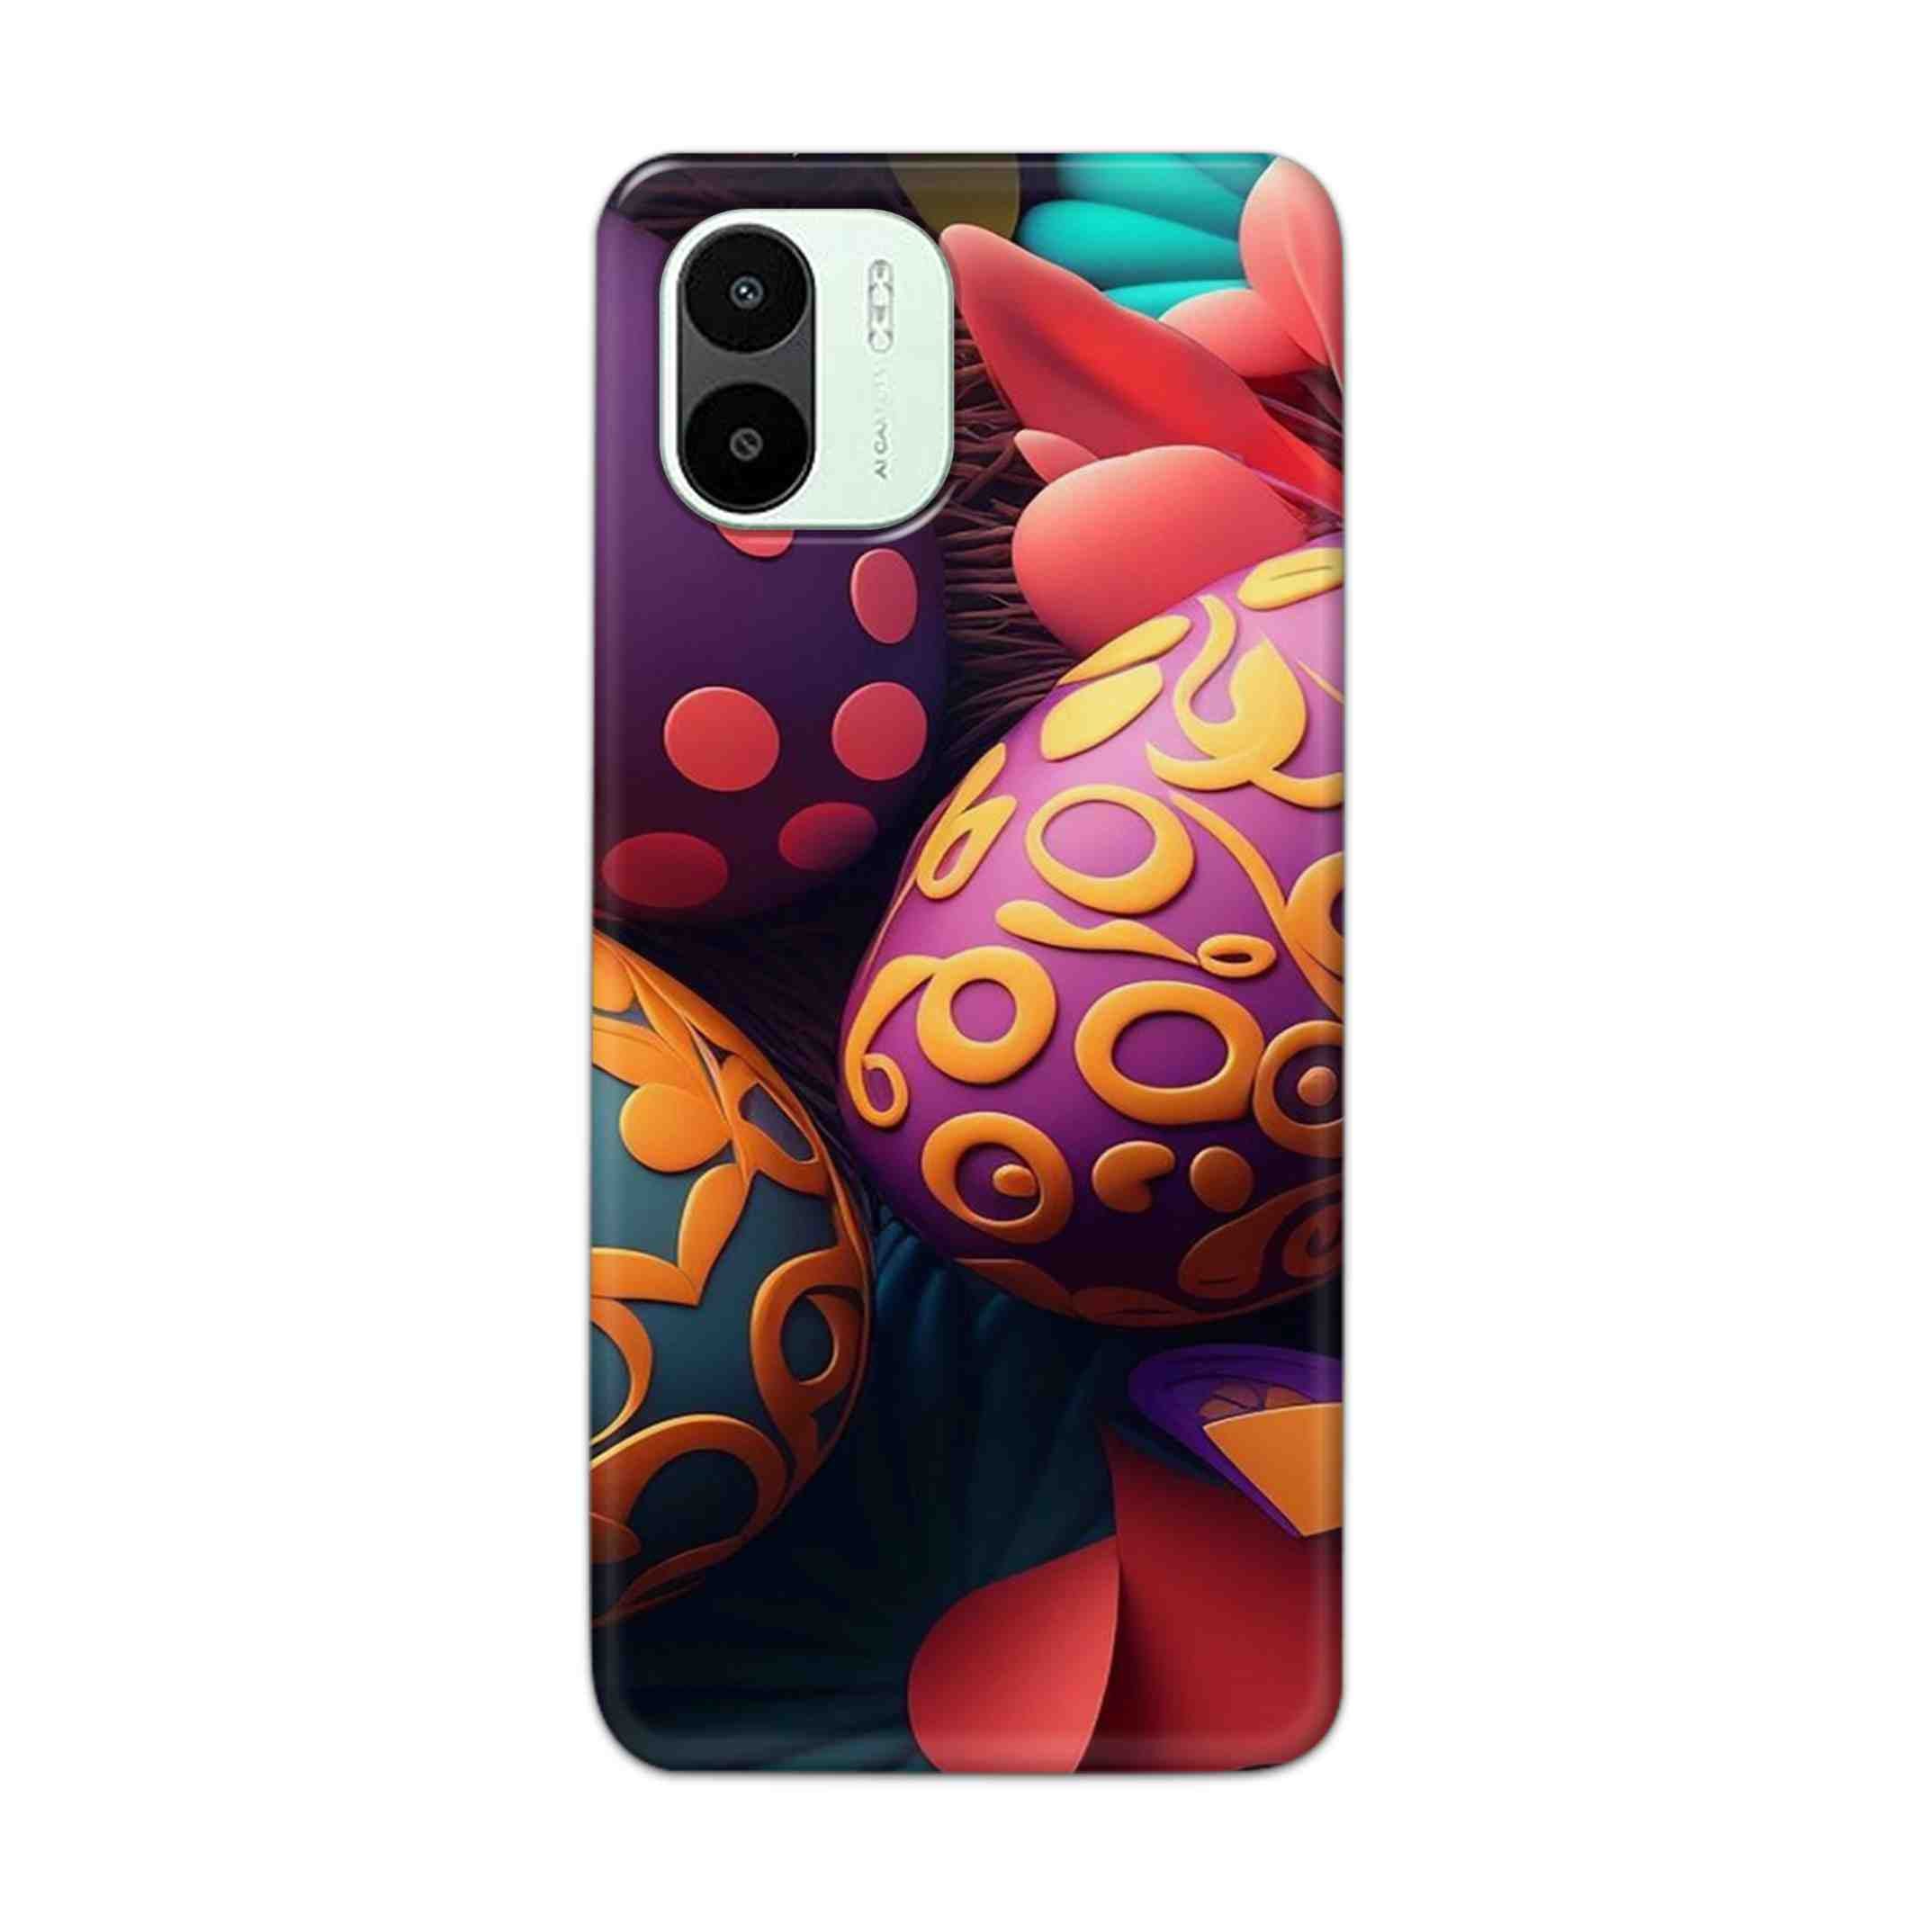 Buy Easter Egg Hard Back Mobile Phone Case Cover For Xiaomi Redmi A1 5G Online